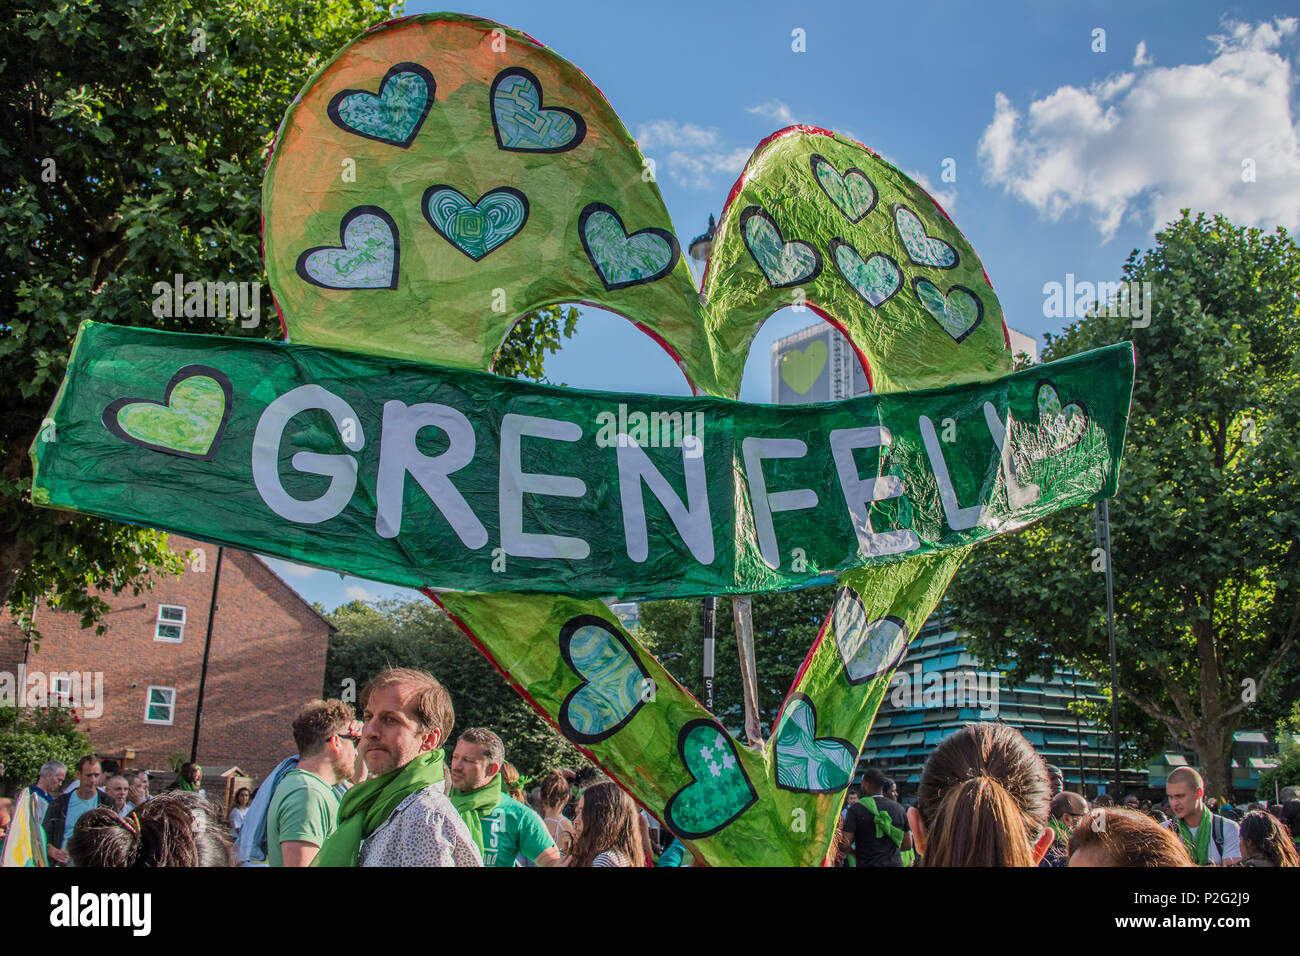 London, UK. 14th June 2018. The march prepares to set off in teh shadow of the tower - The first anniversary of the Grenfell Tower Disaster Credit: Guy Bell/Alamy Live News Stock Photo